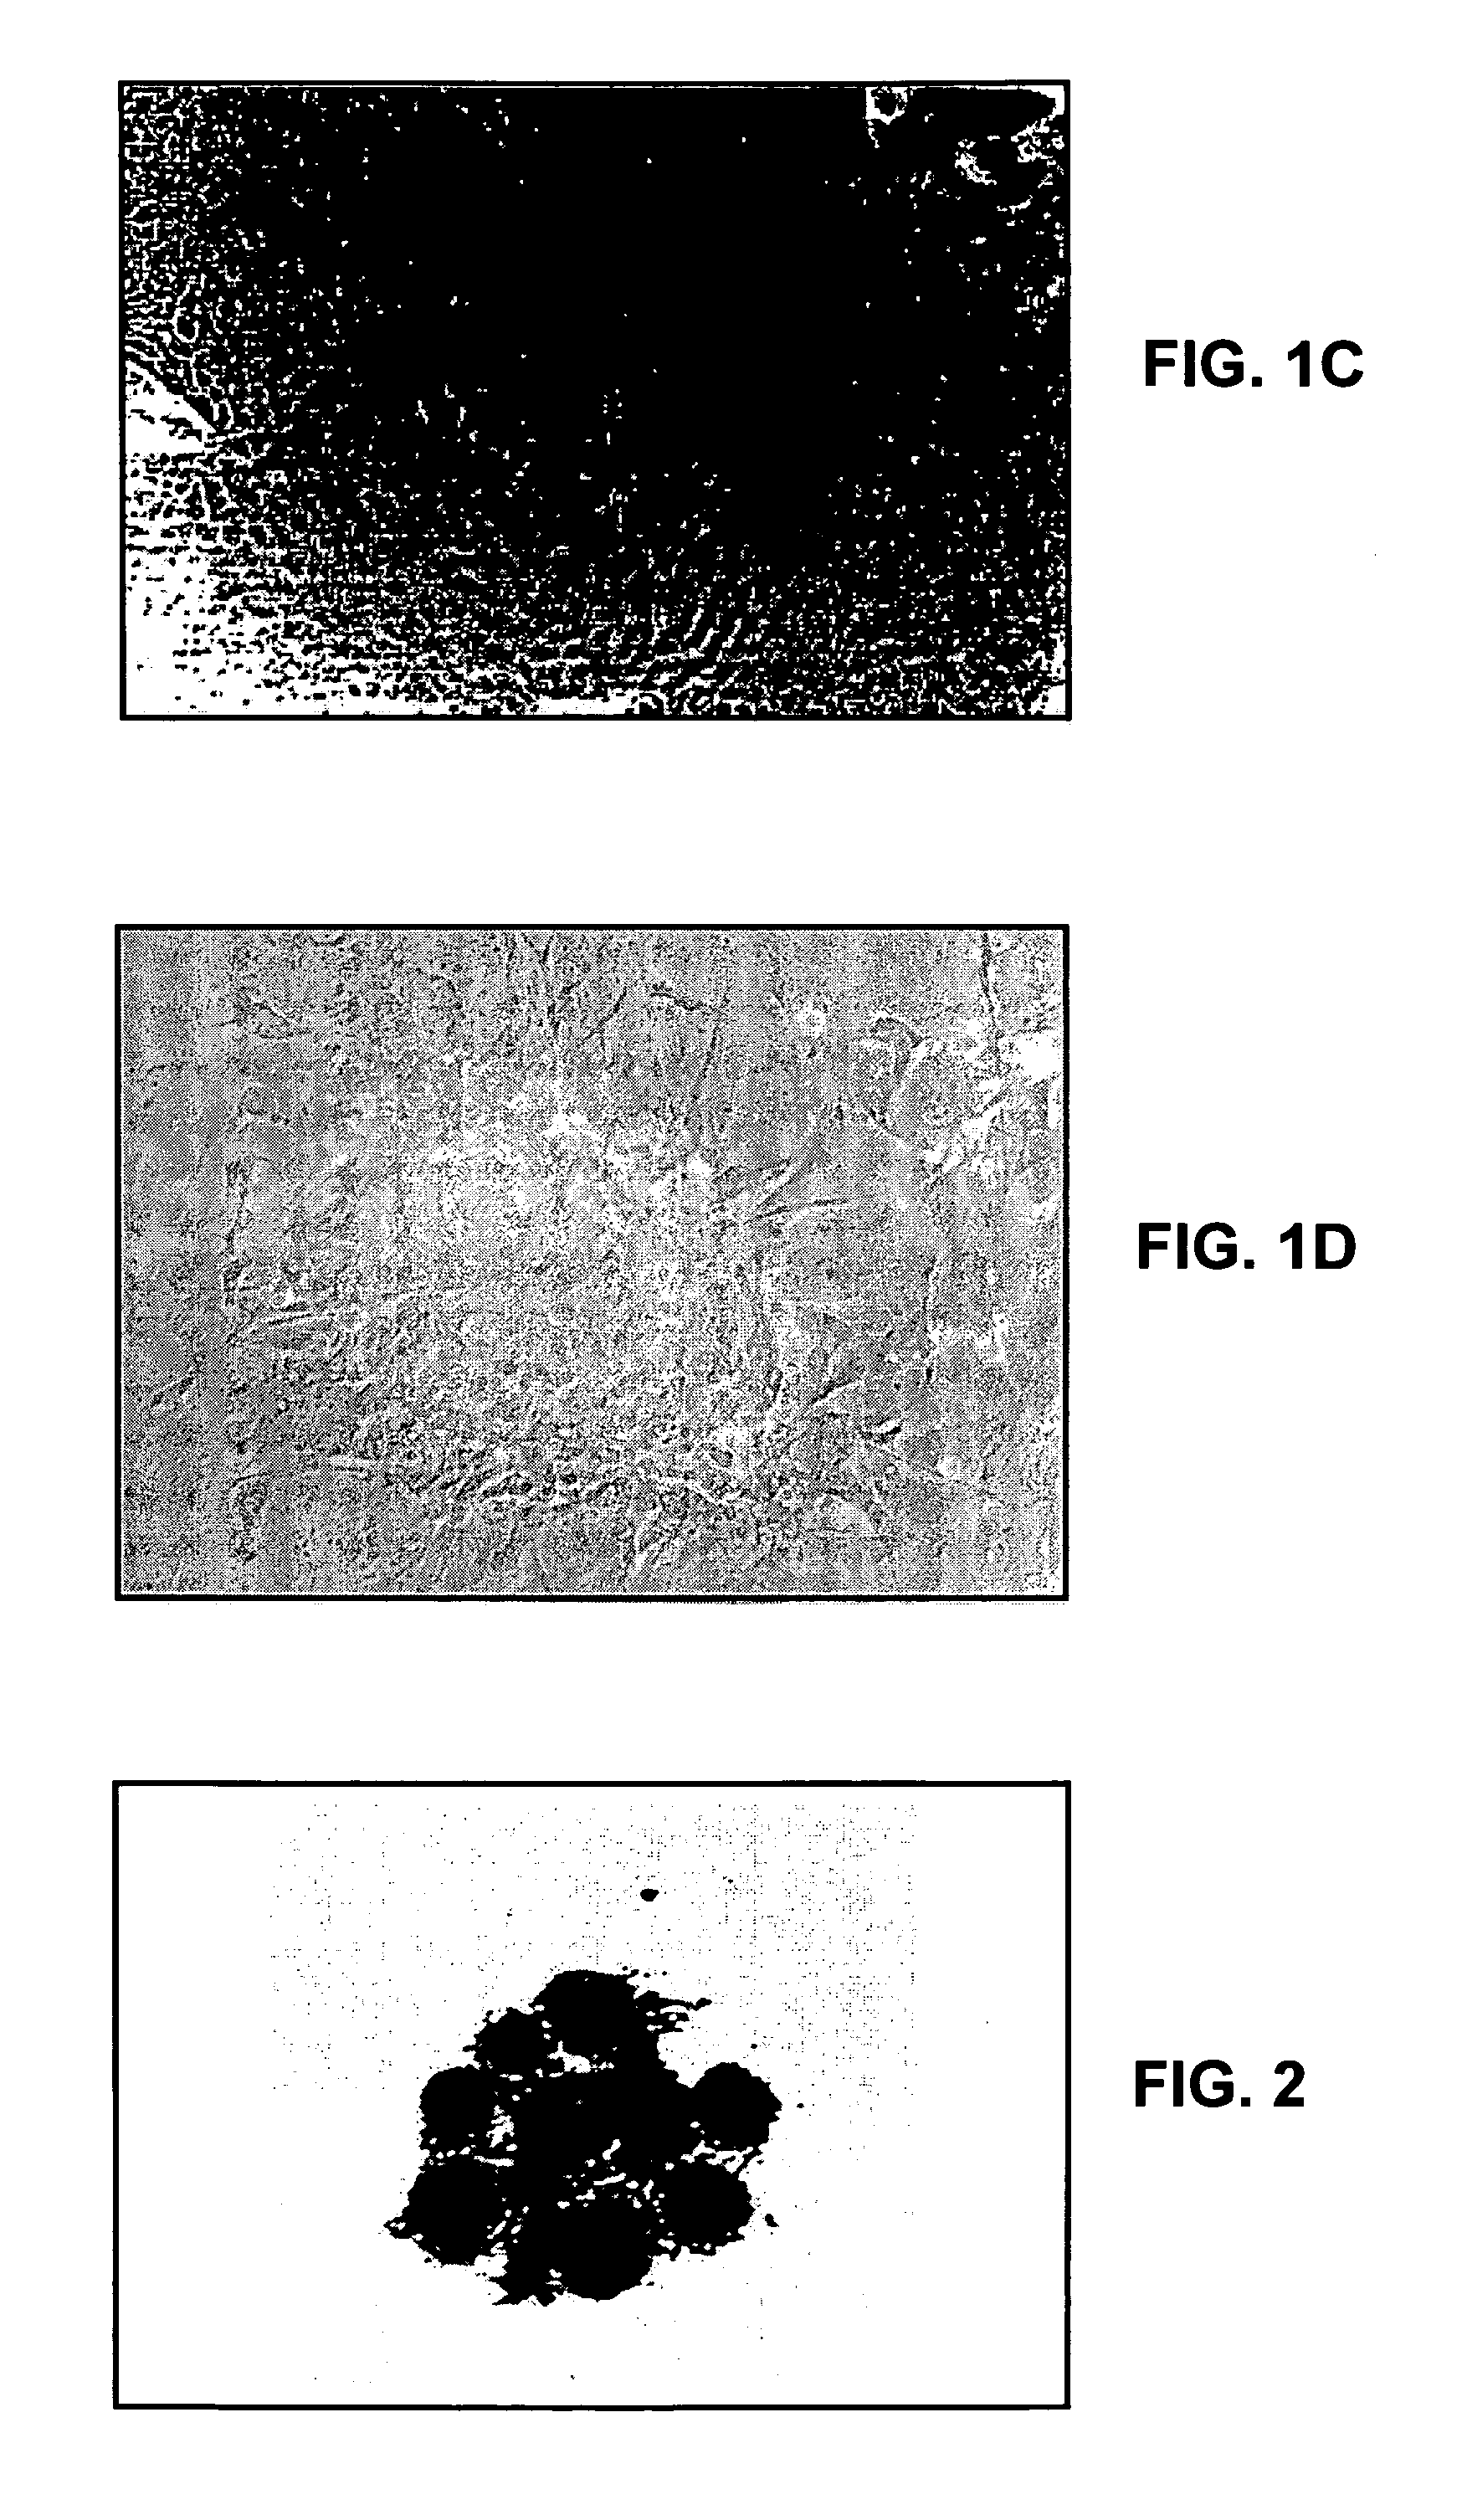 Transgenic ungulate compositions and methods